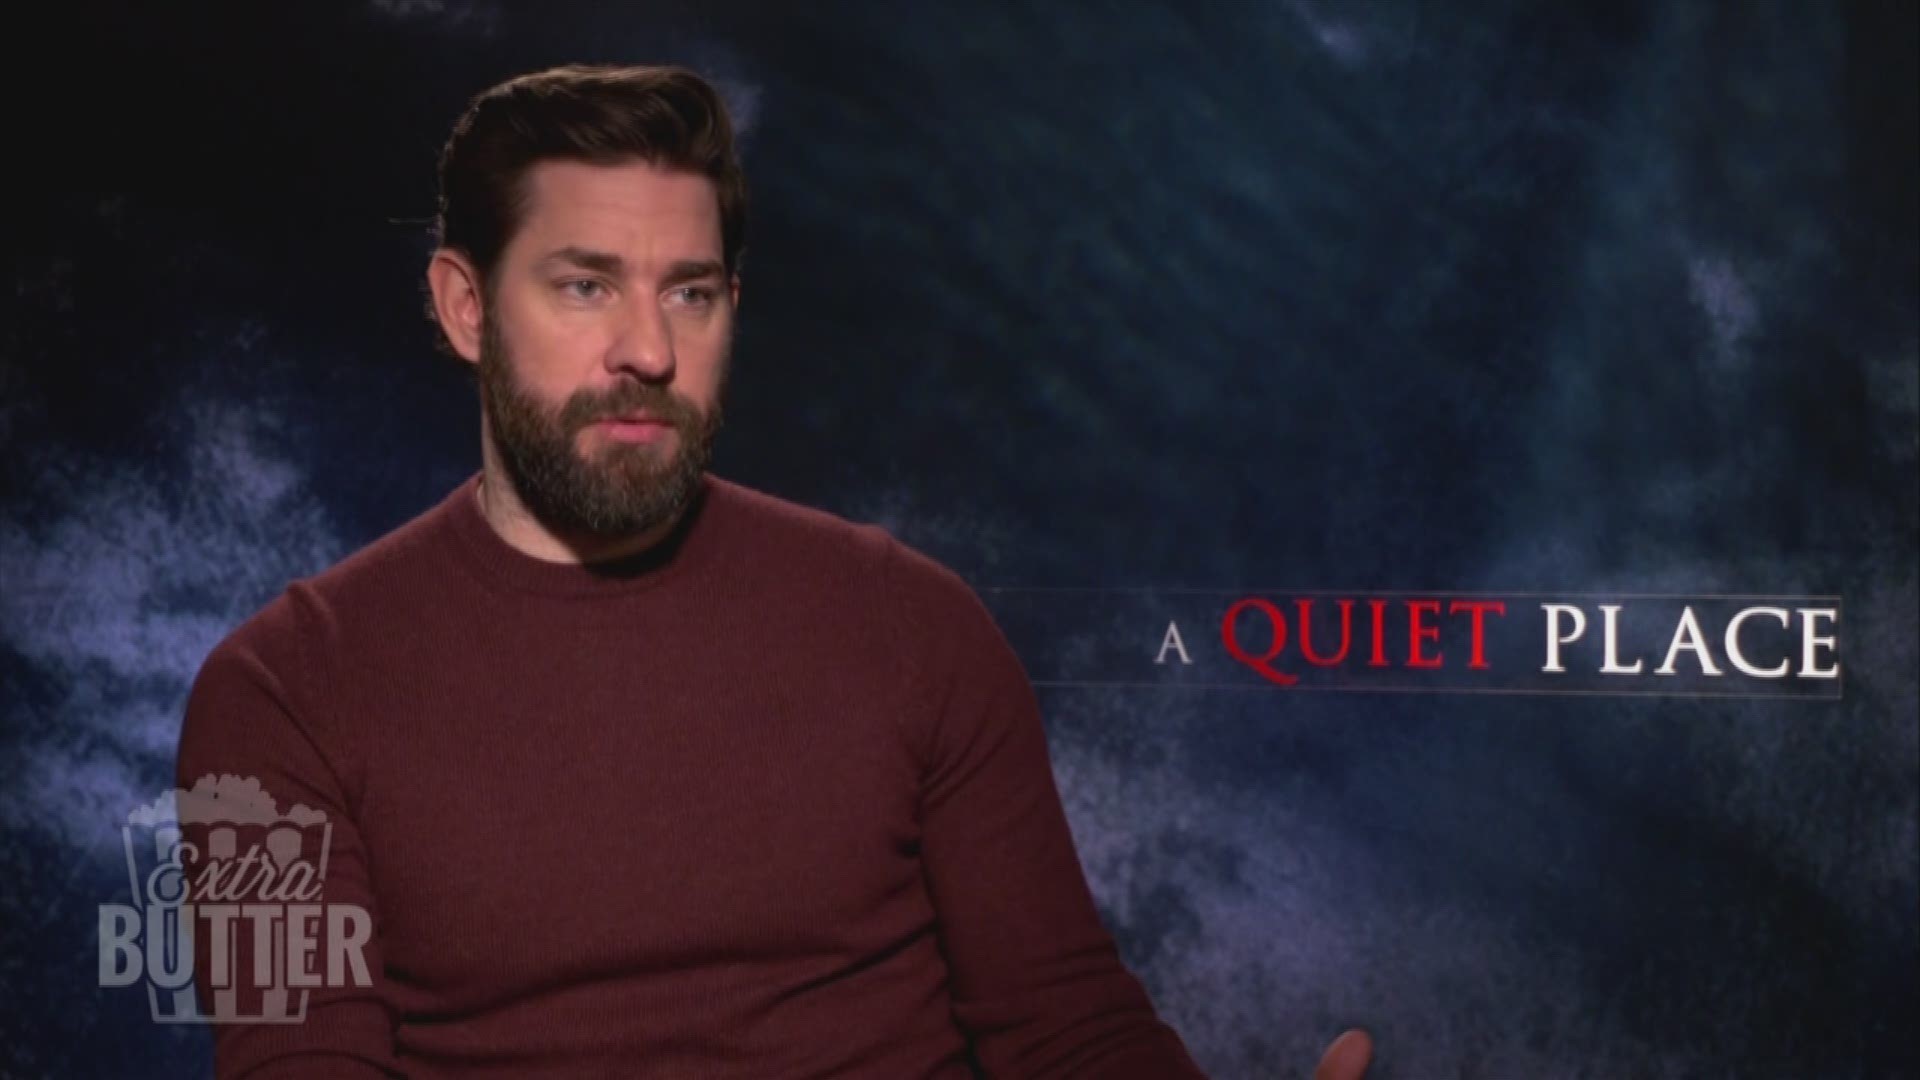 Funny man John Krasinski follows Jordan Peele's footsteps from comedy to thriller film. (Travel and accommodations paid for by Paramount Pictures)